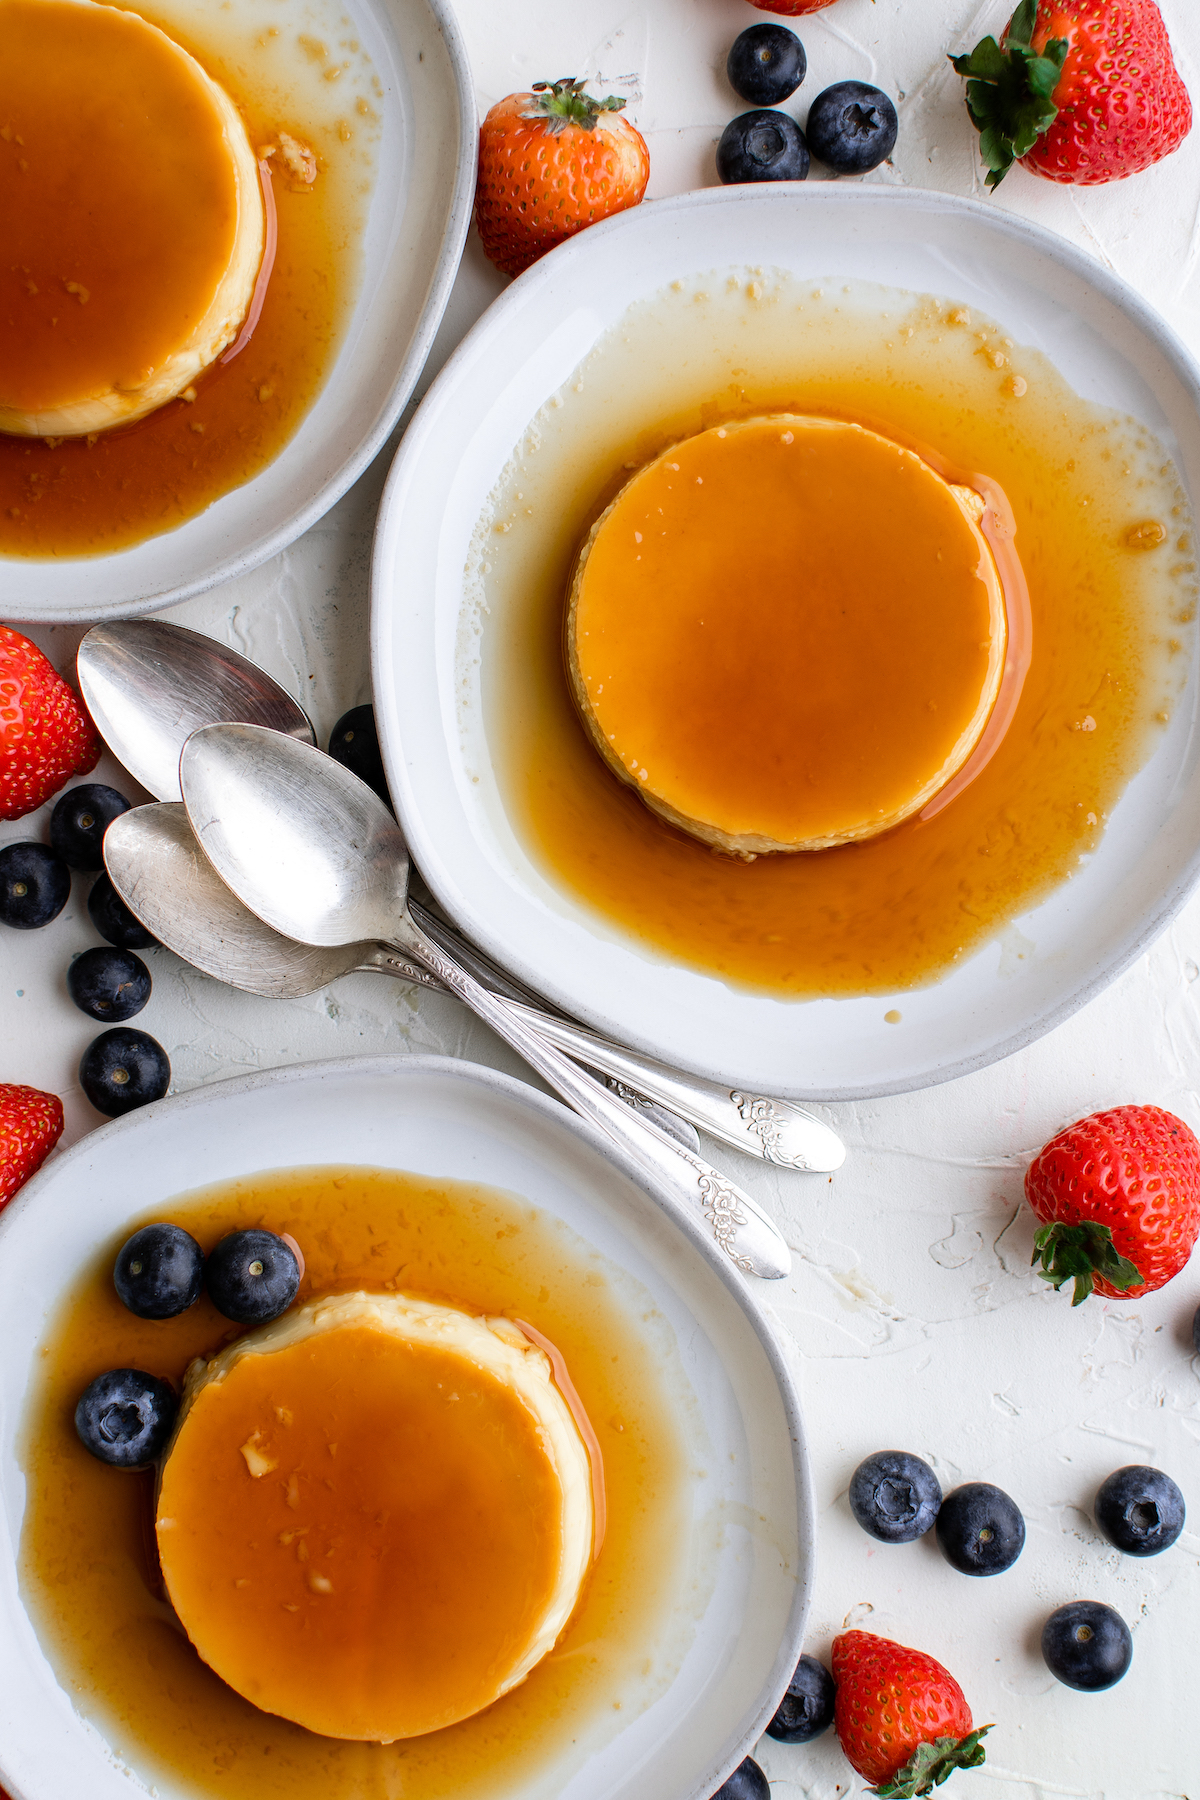 Three individual crème caramel servings on saucers, on a white table scattered with strawberries and blueberries. Three spoons are arranged between the saucers.